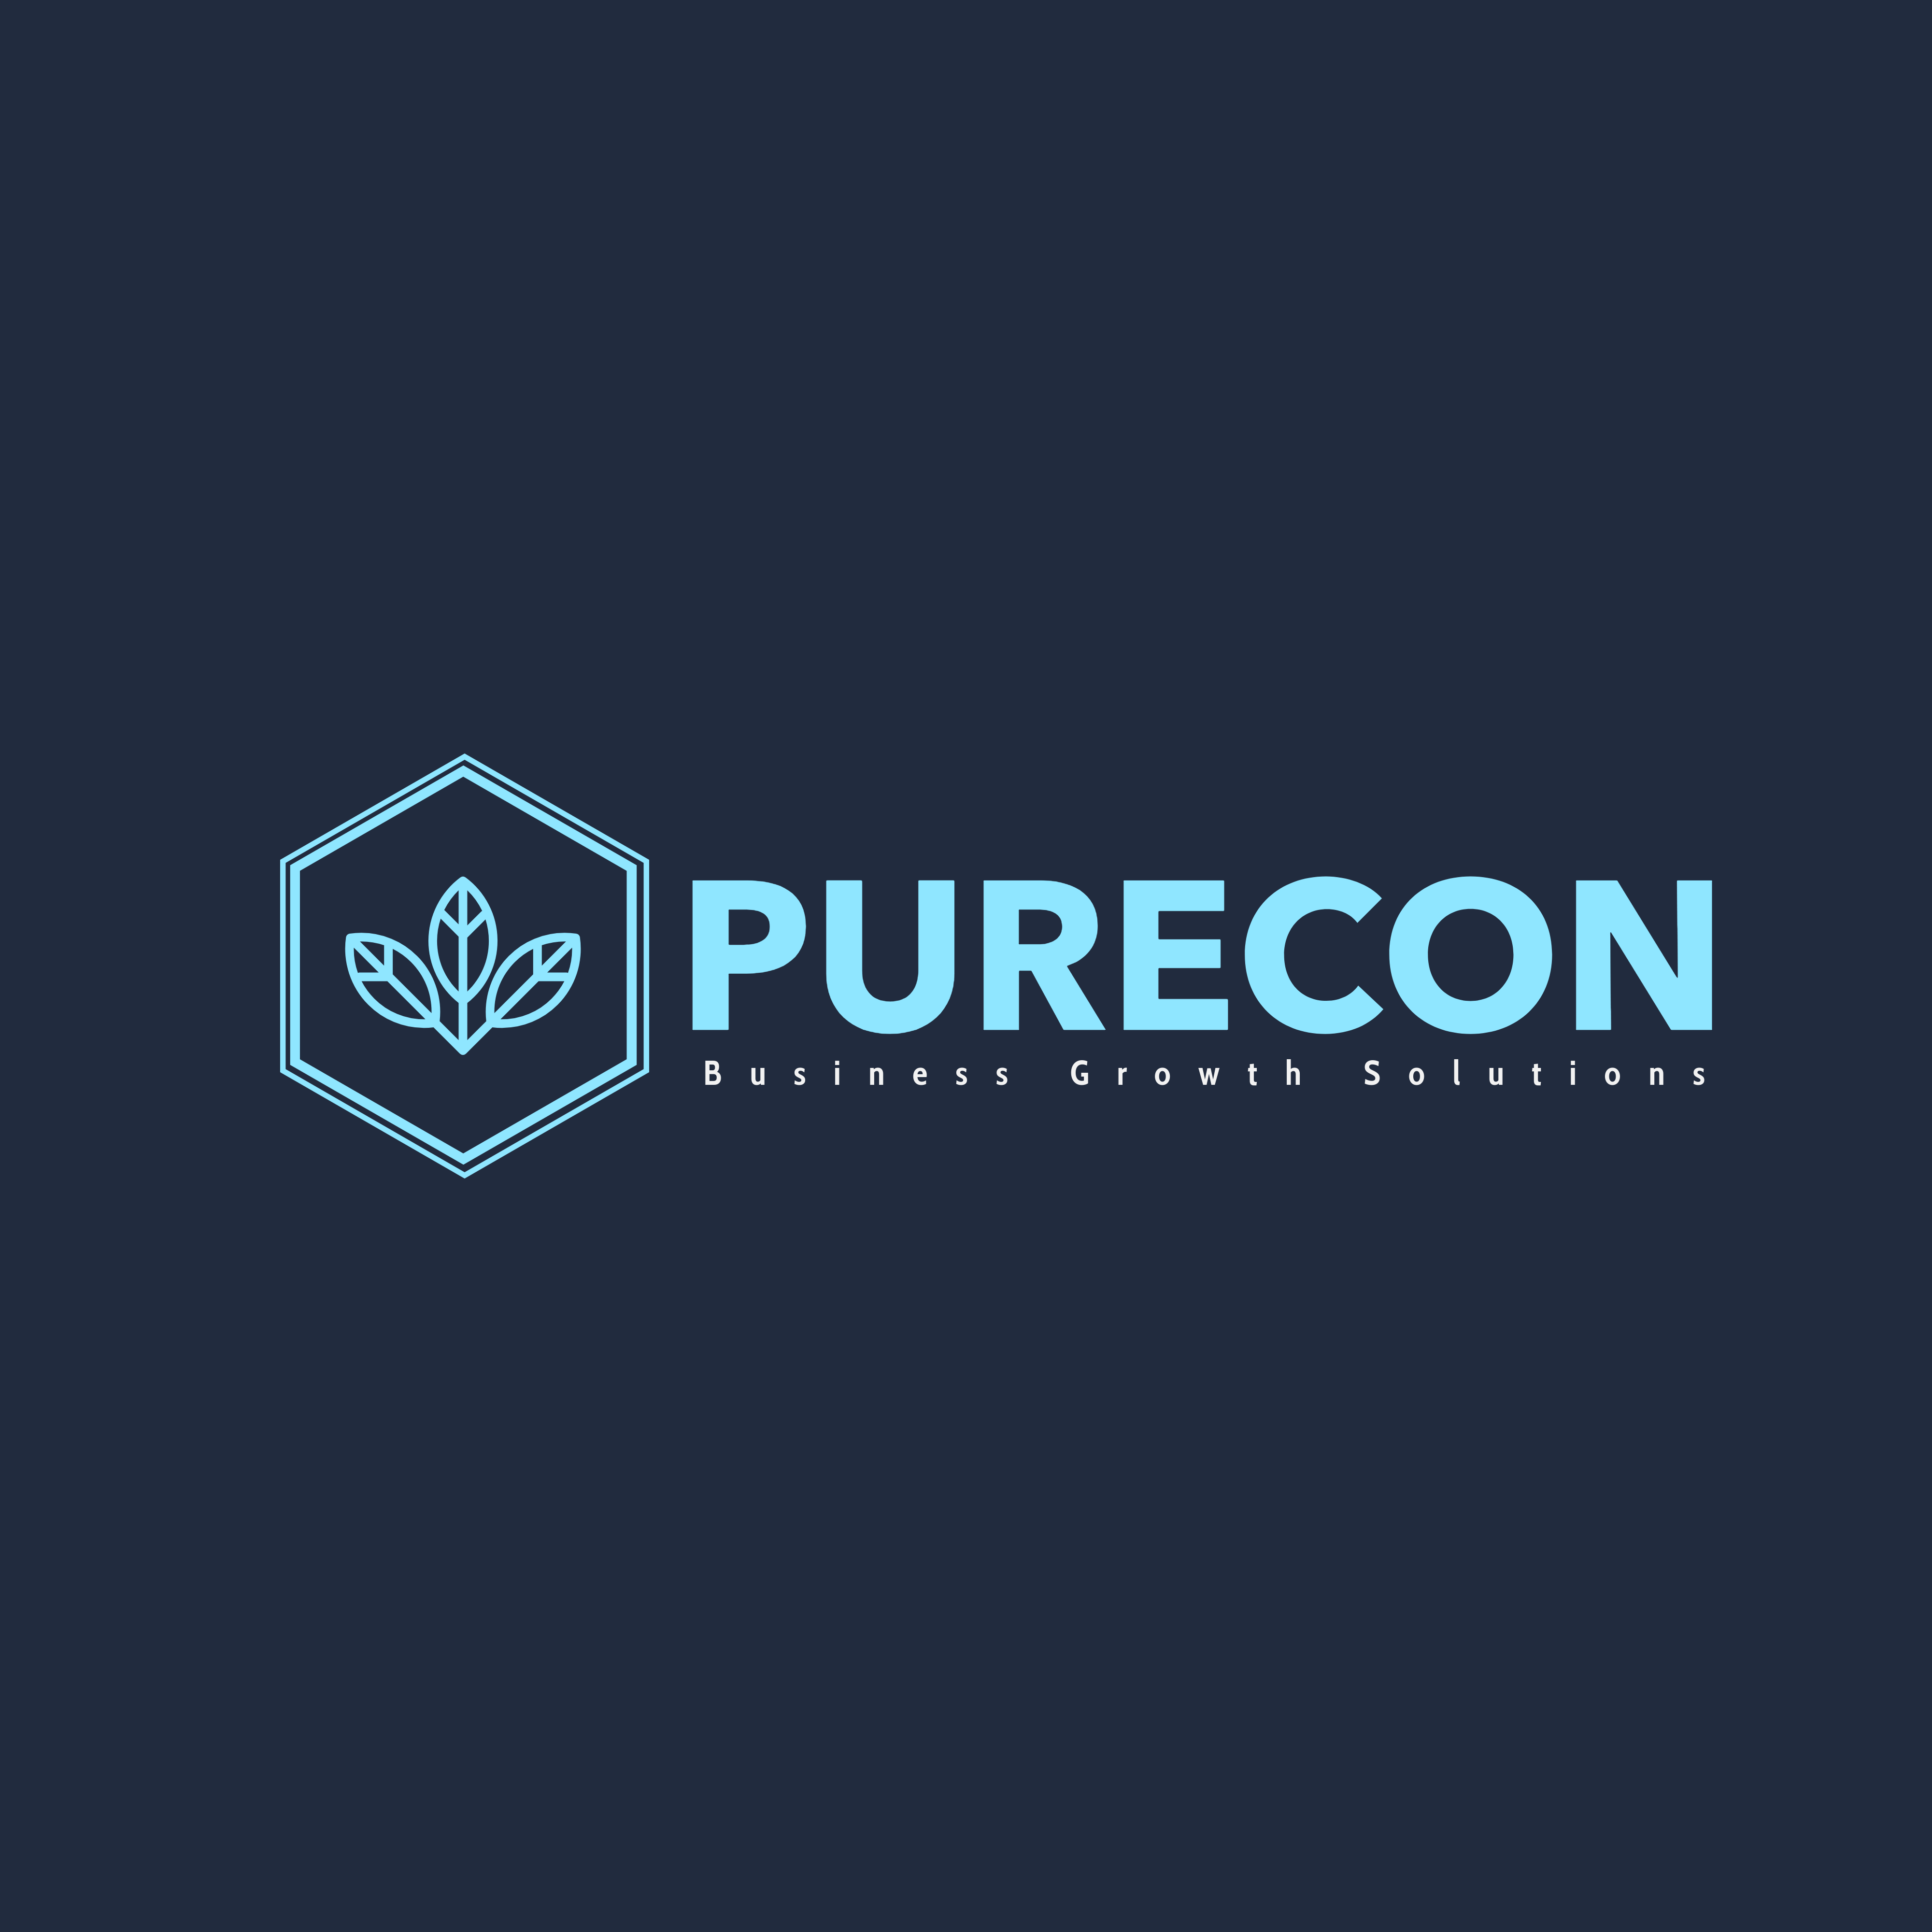 Purecon Business Growth Solutions Logo